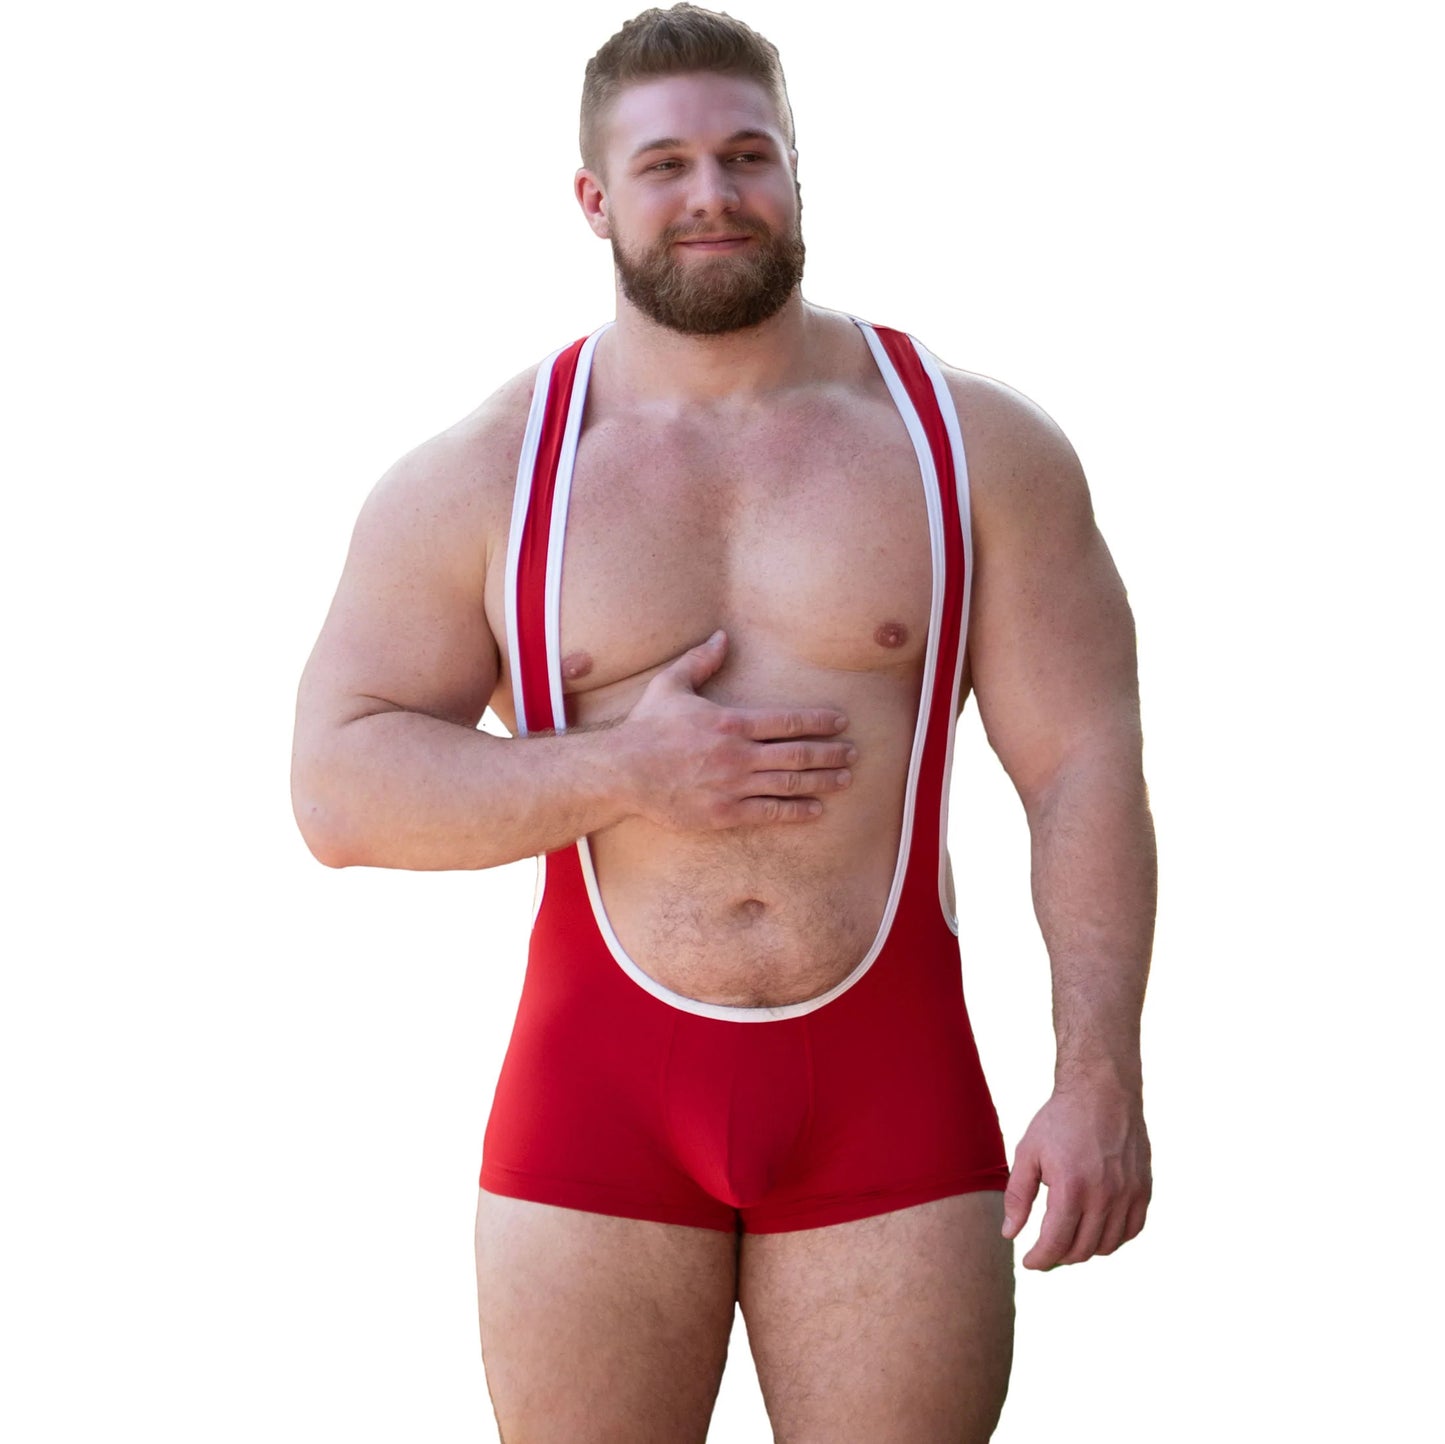 The front of the Reveal Singlet.